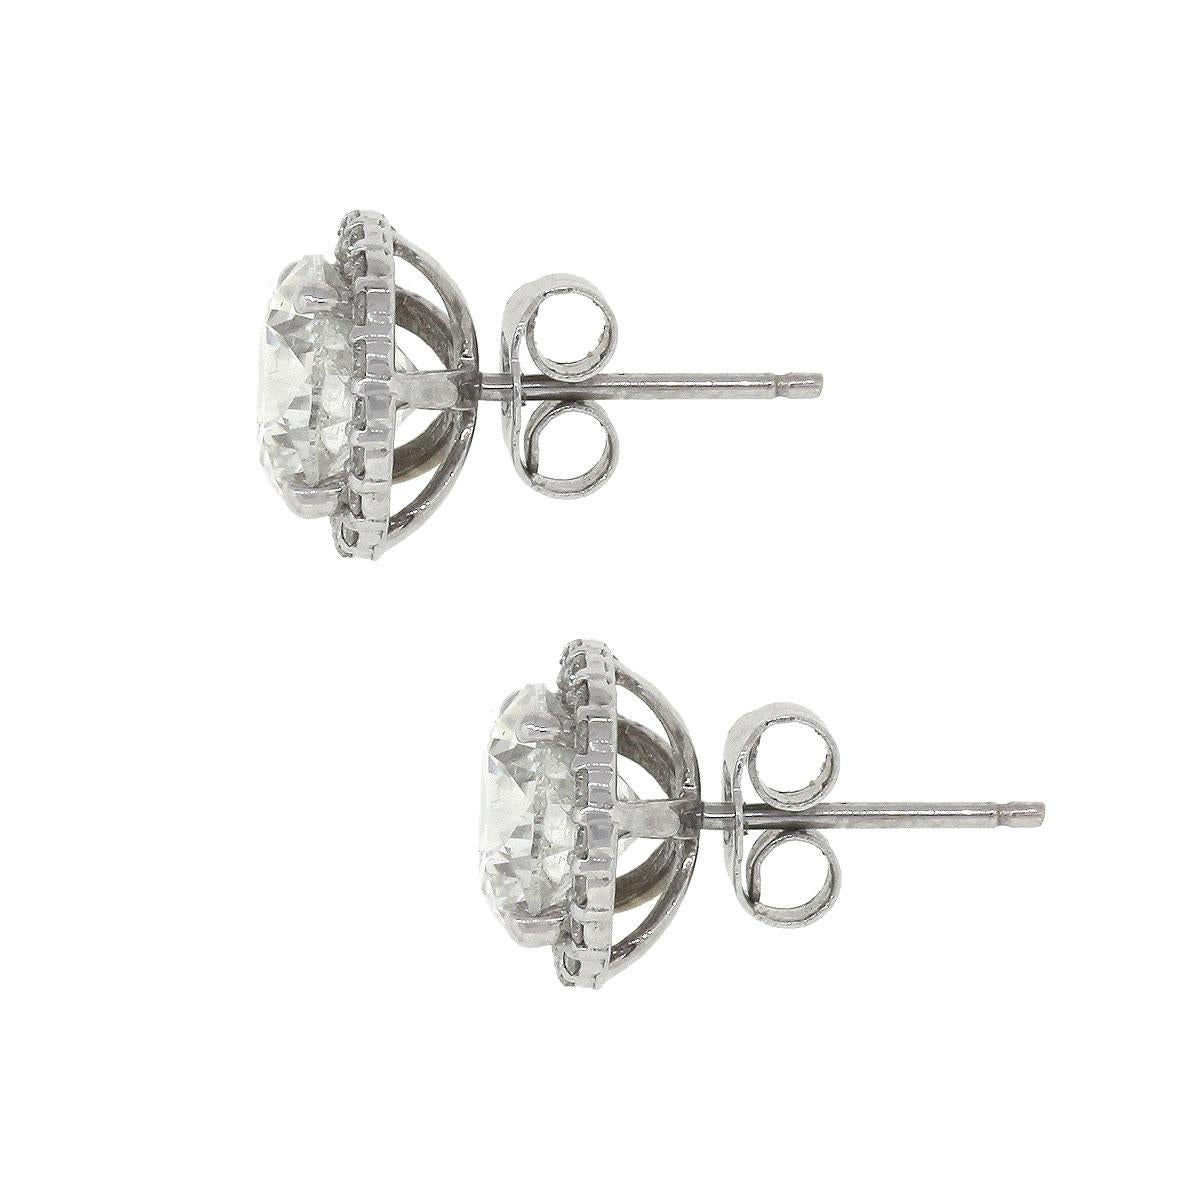 Material: 14k white gold
Diamond Details: Approximately 3.20ctw of round brilliant diamonds. Diamonds are G/H in color and SI in clarity.
Halo Diamond Details: Approximately 0.25ctw of round brilliant diamonds. Diamonds are G/H in color and SI in